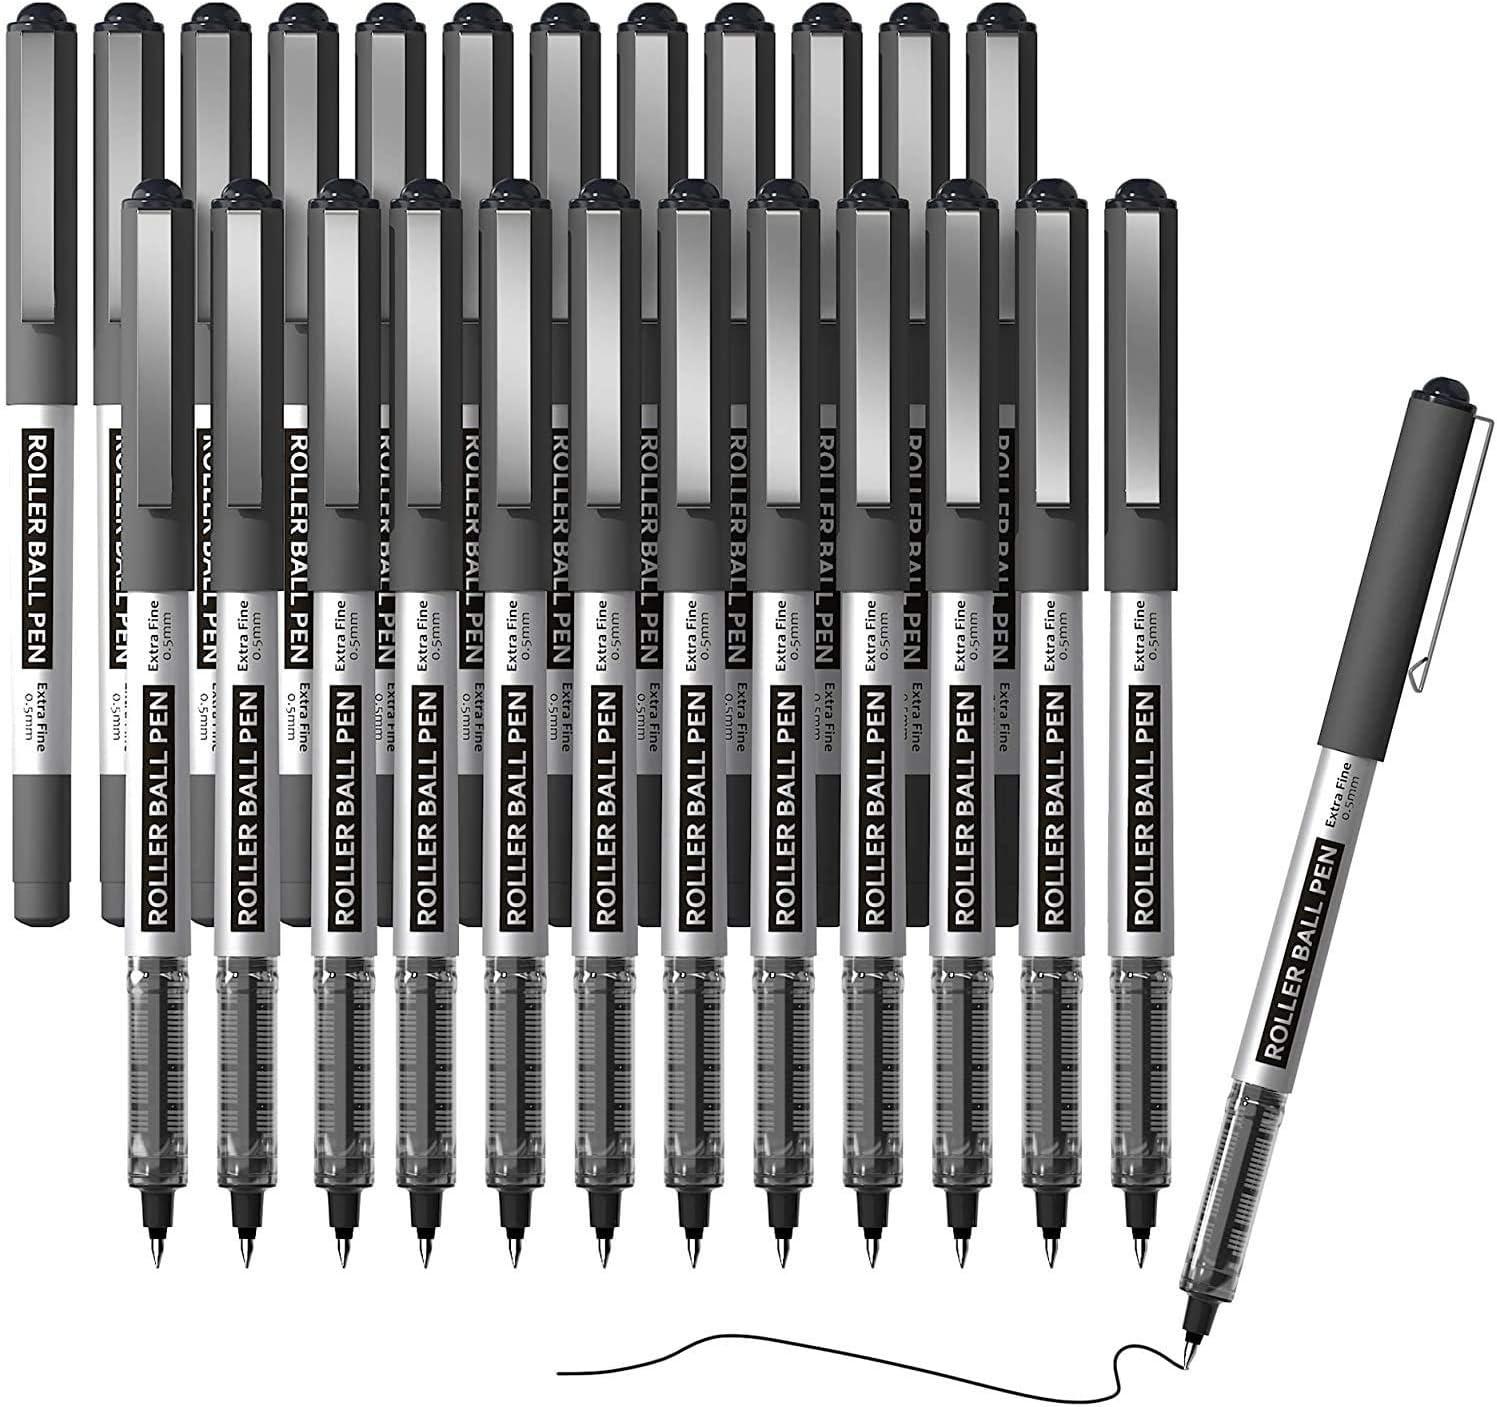 rollerball pens shuttle art 25 pack 0.5mm extra fine point black liquid ink pens quick drying and long